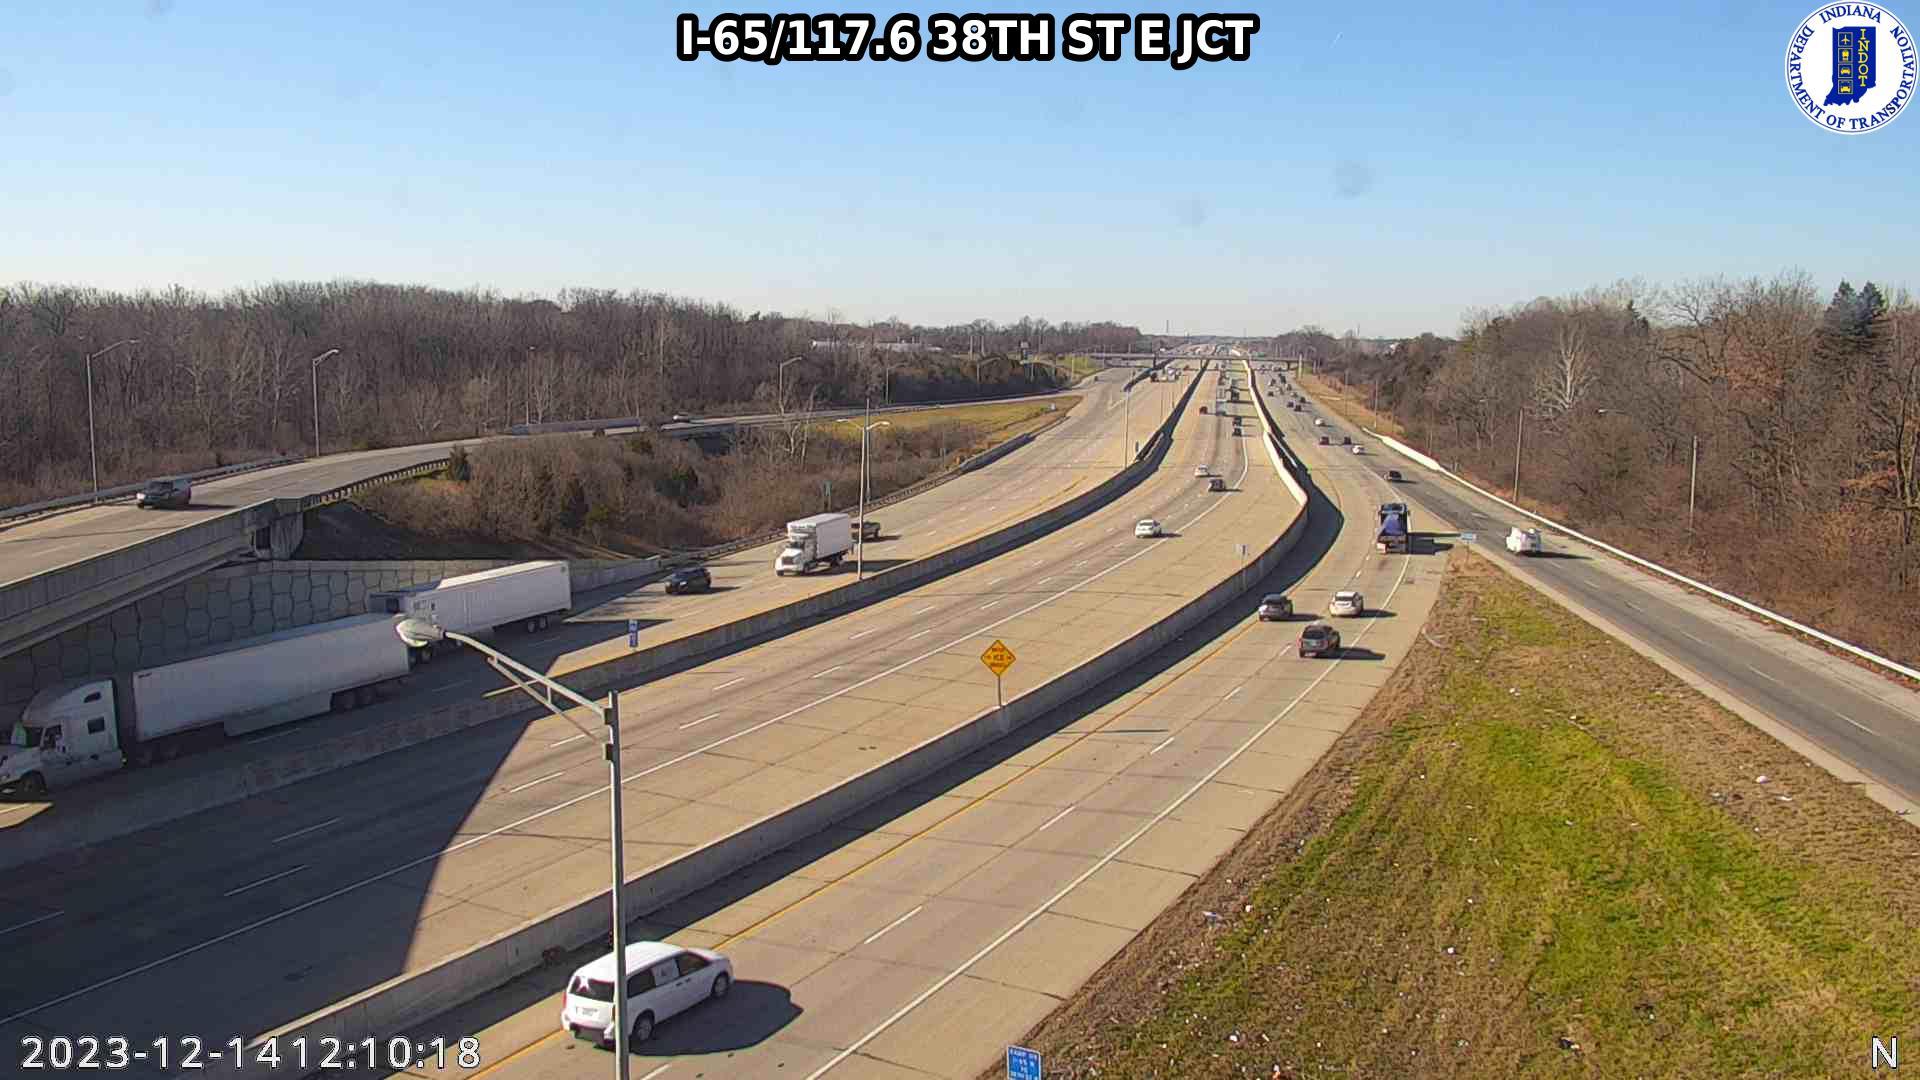 Traffic Cam Indianapolis: I-65: I-65/117.6 38TH ST E JCT Player